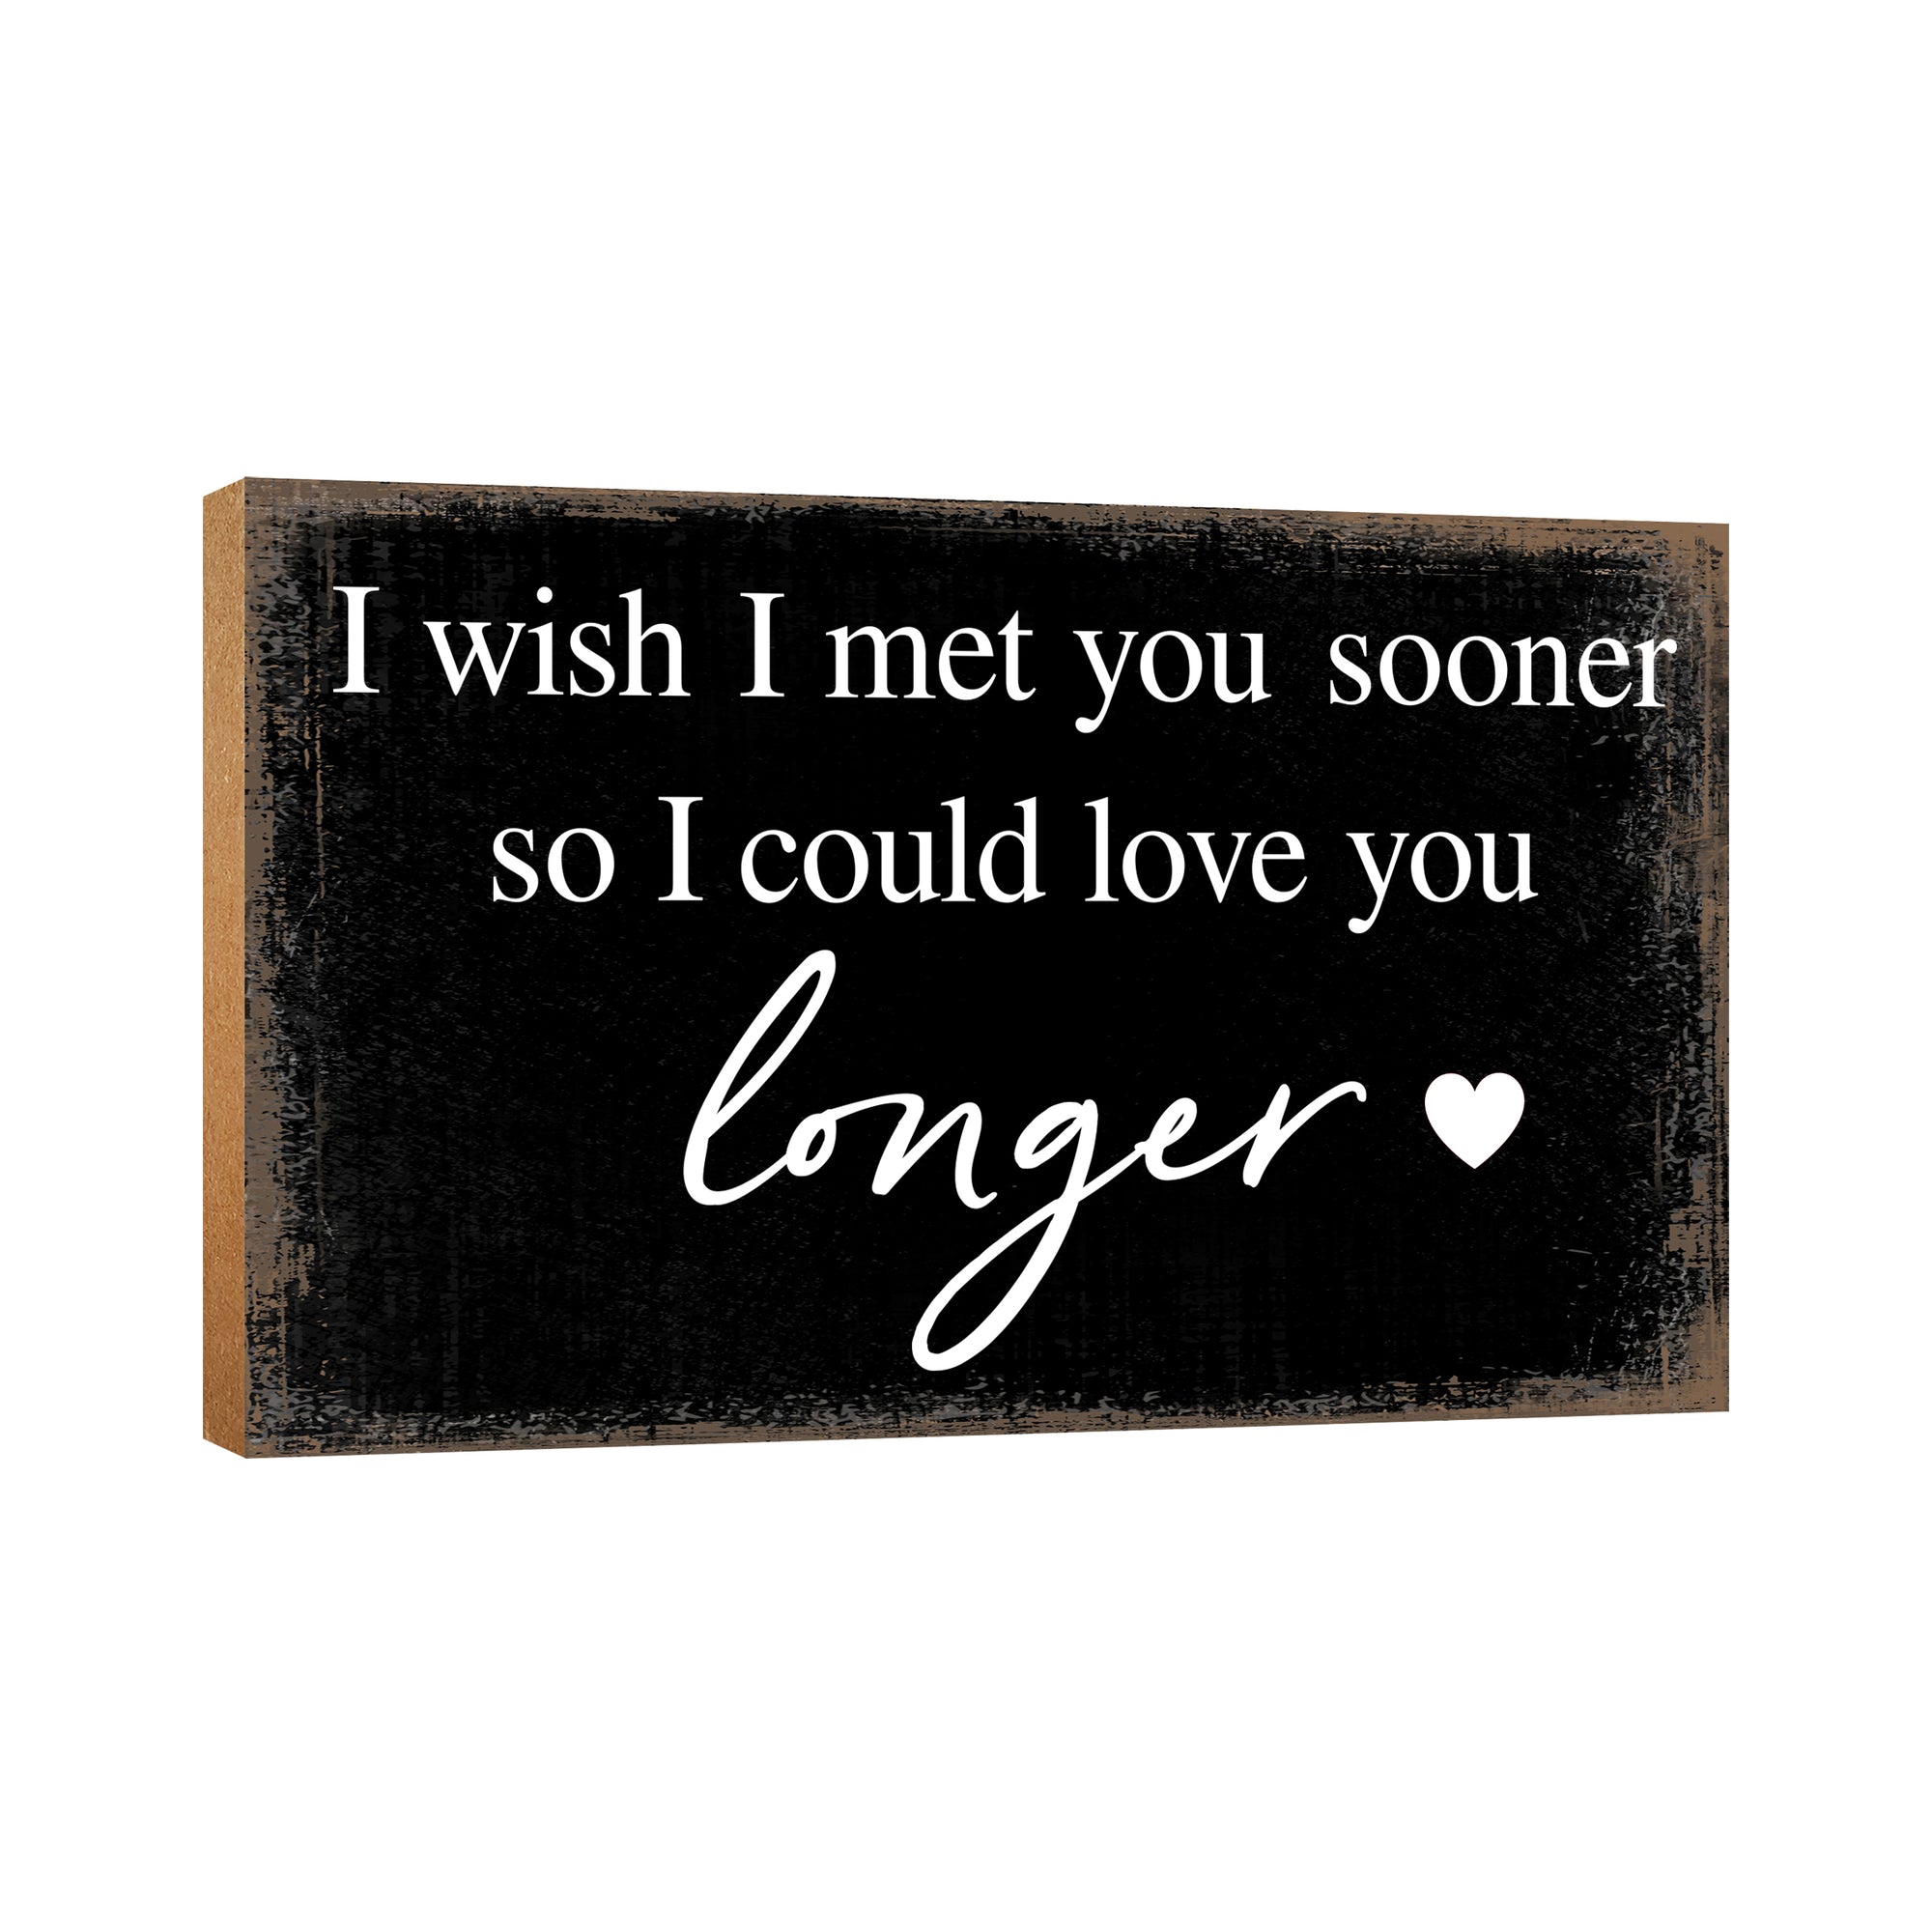 Unique gift table décor: Wooden tabletop decoration with sentiments for your loved one.